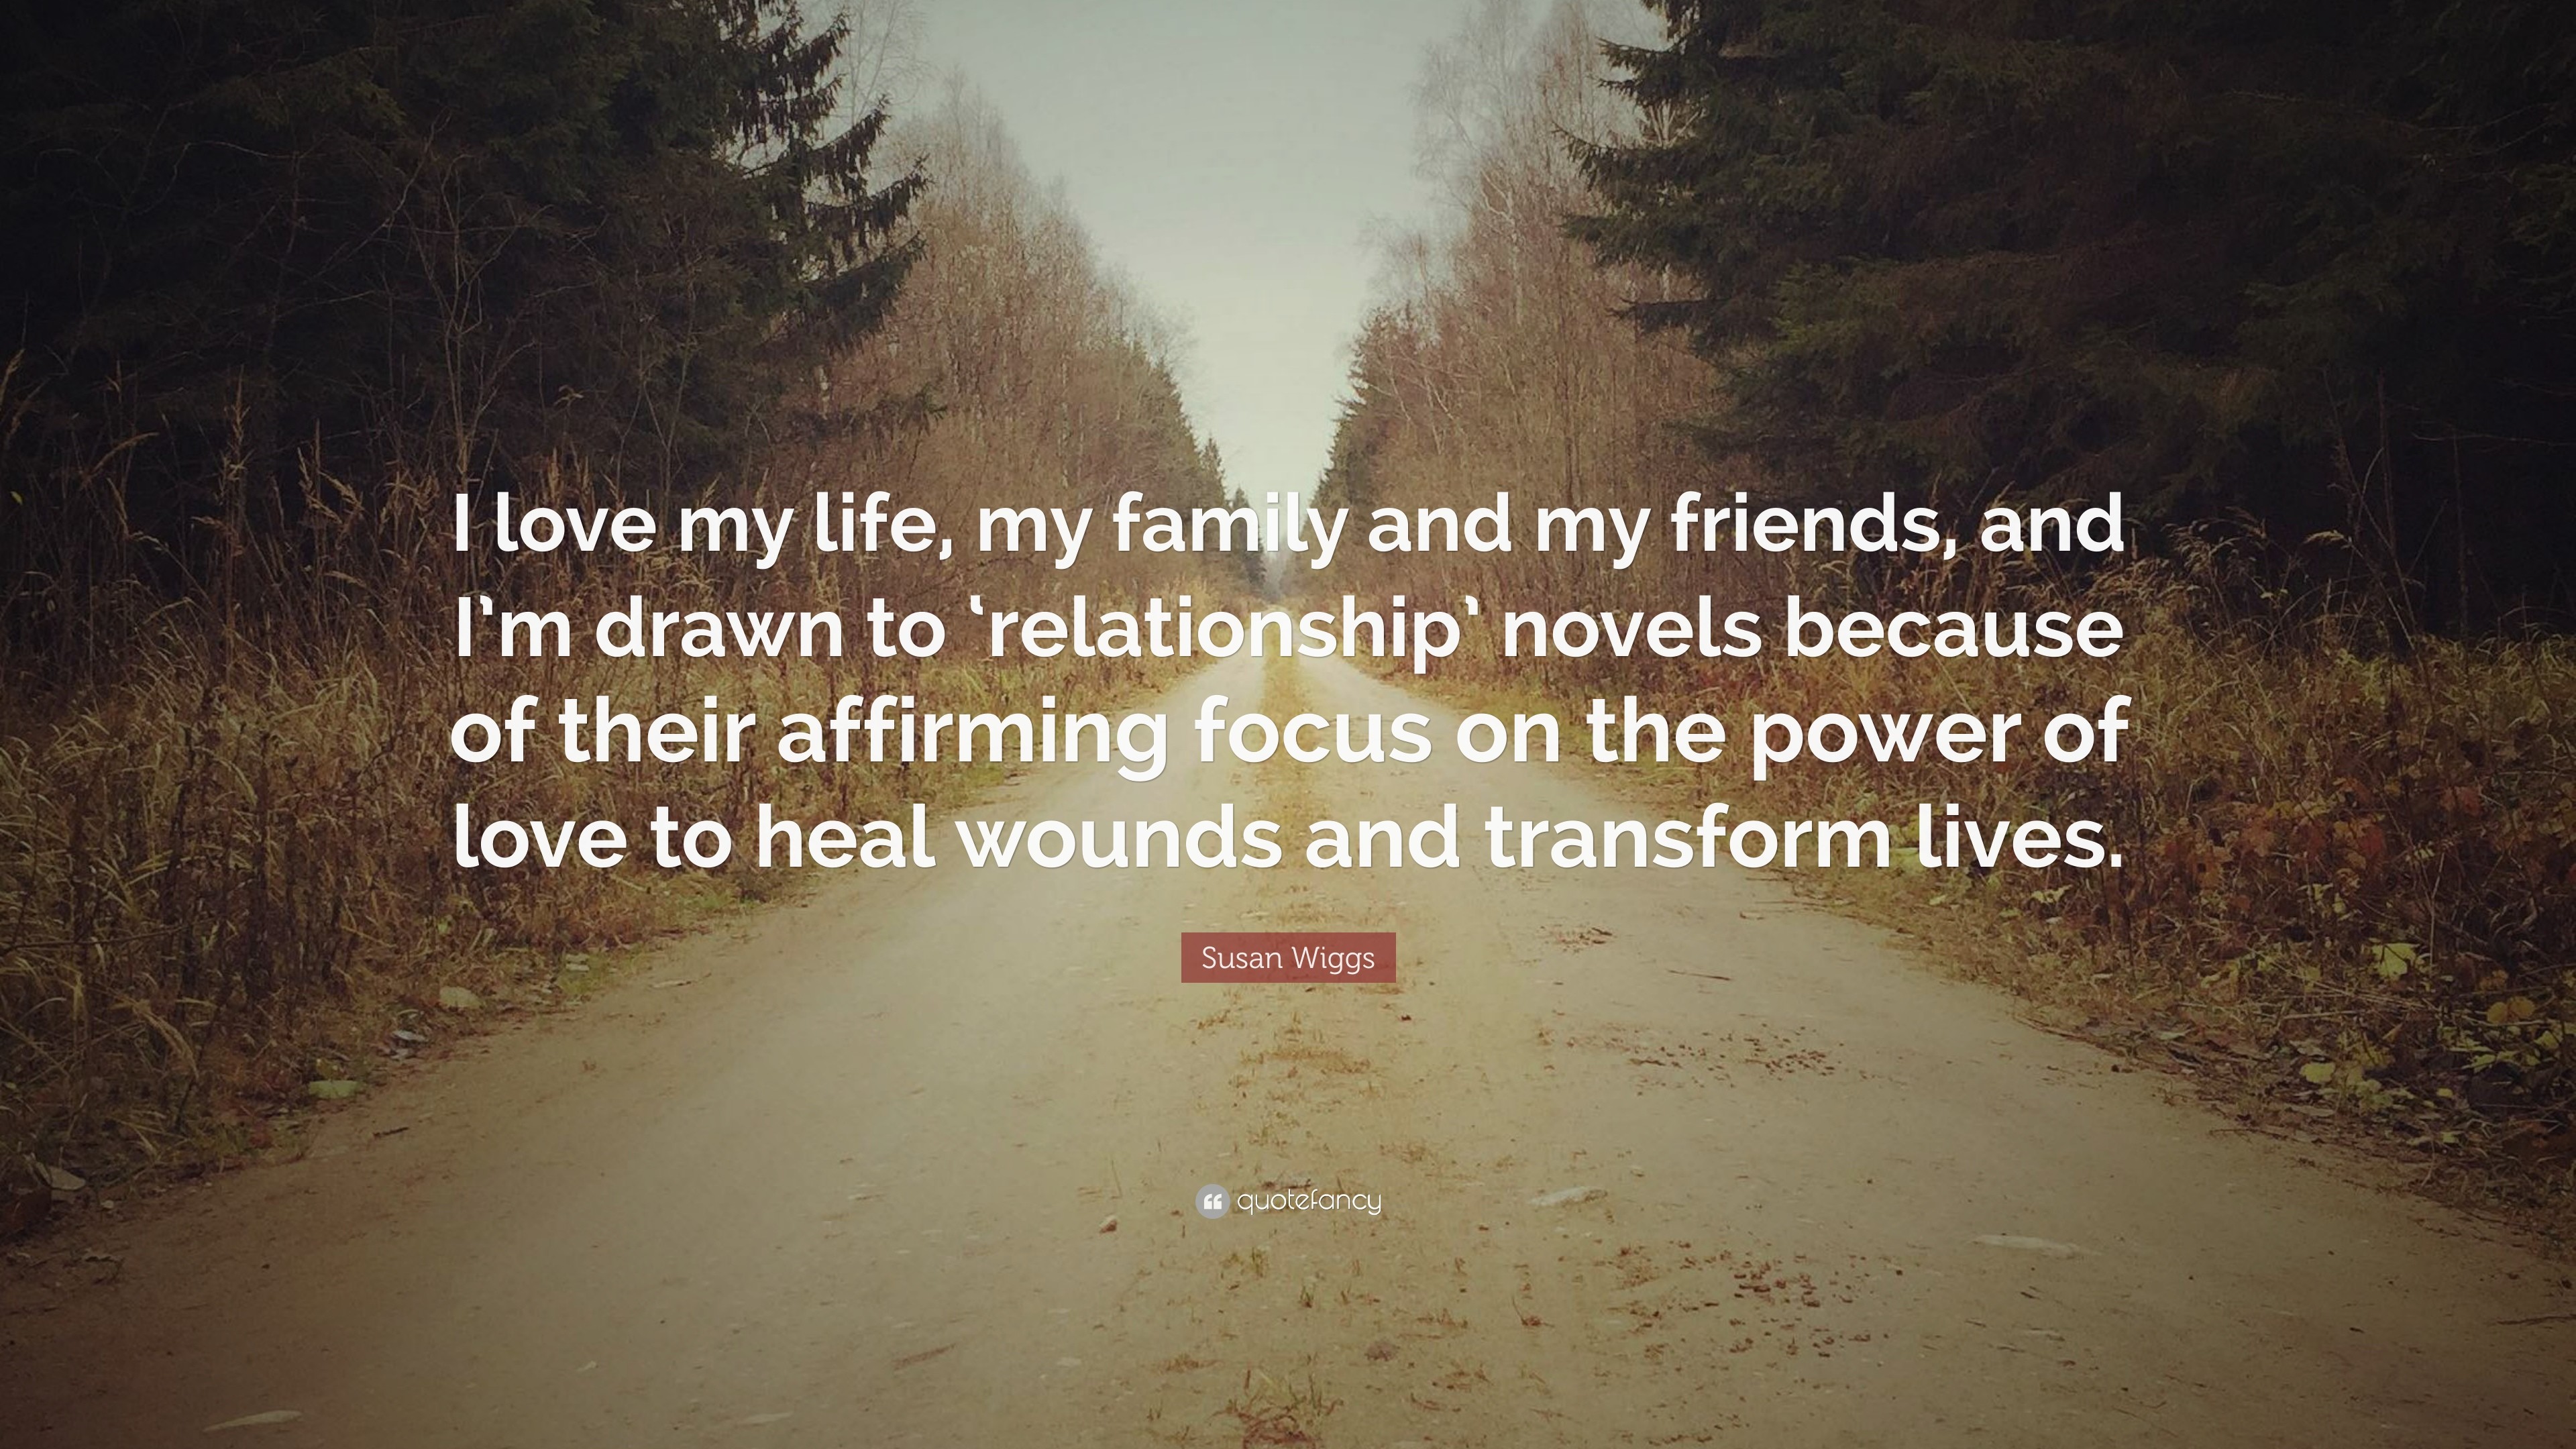 Susan Wiggs Quote: “I love my life, my family and my friends,